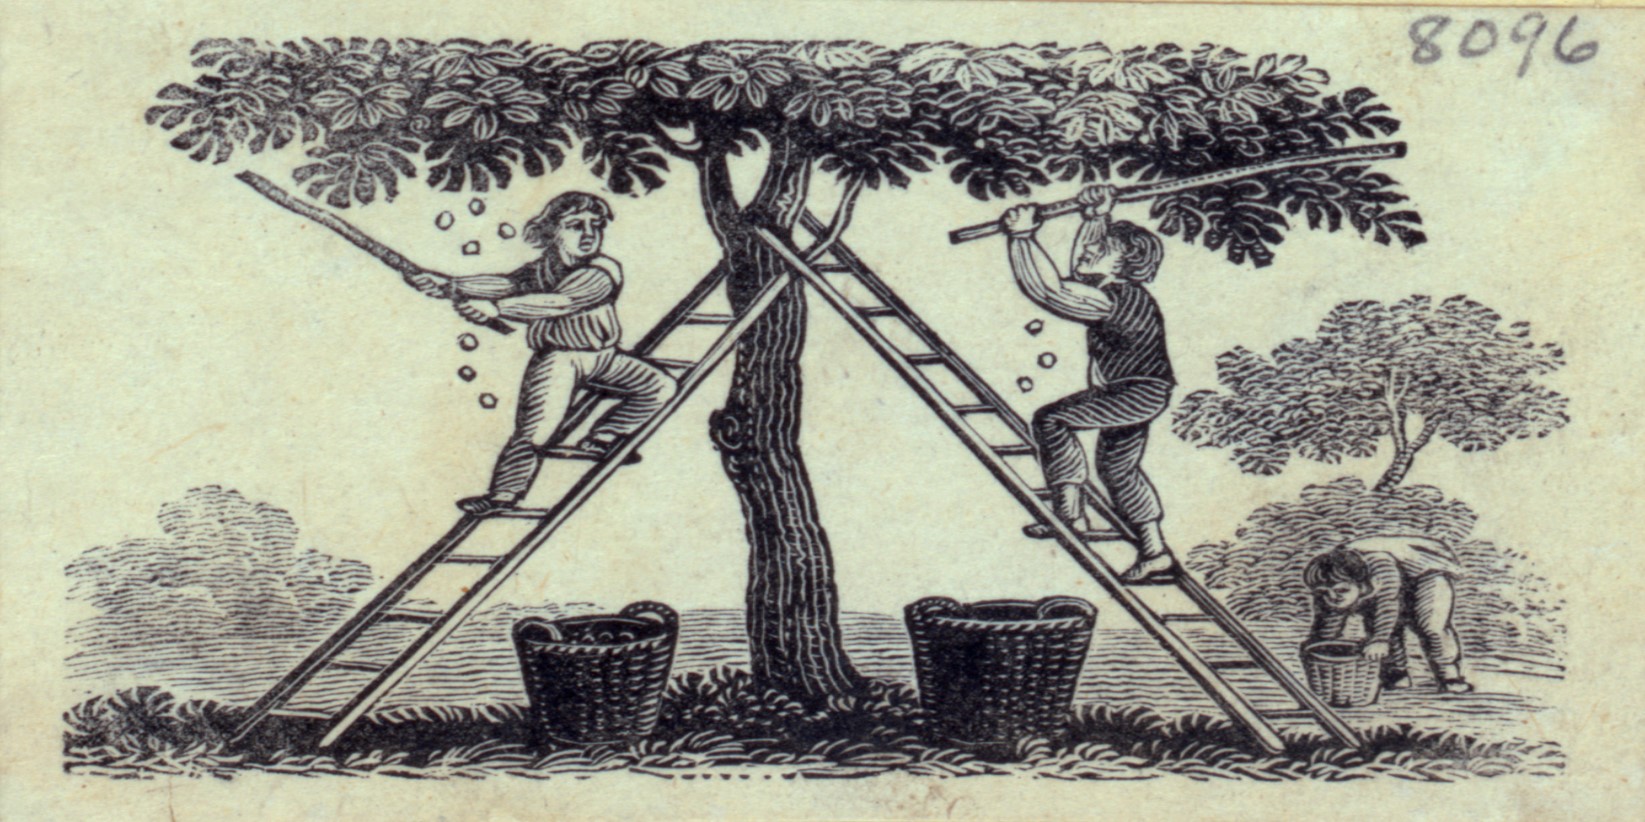 Image of colonial men harvesting fruit trees by hand